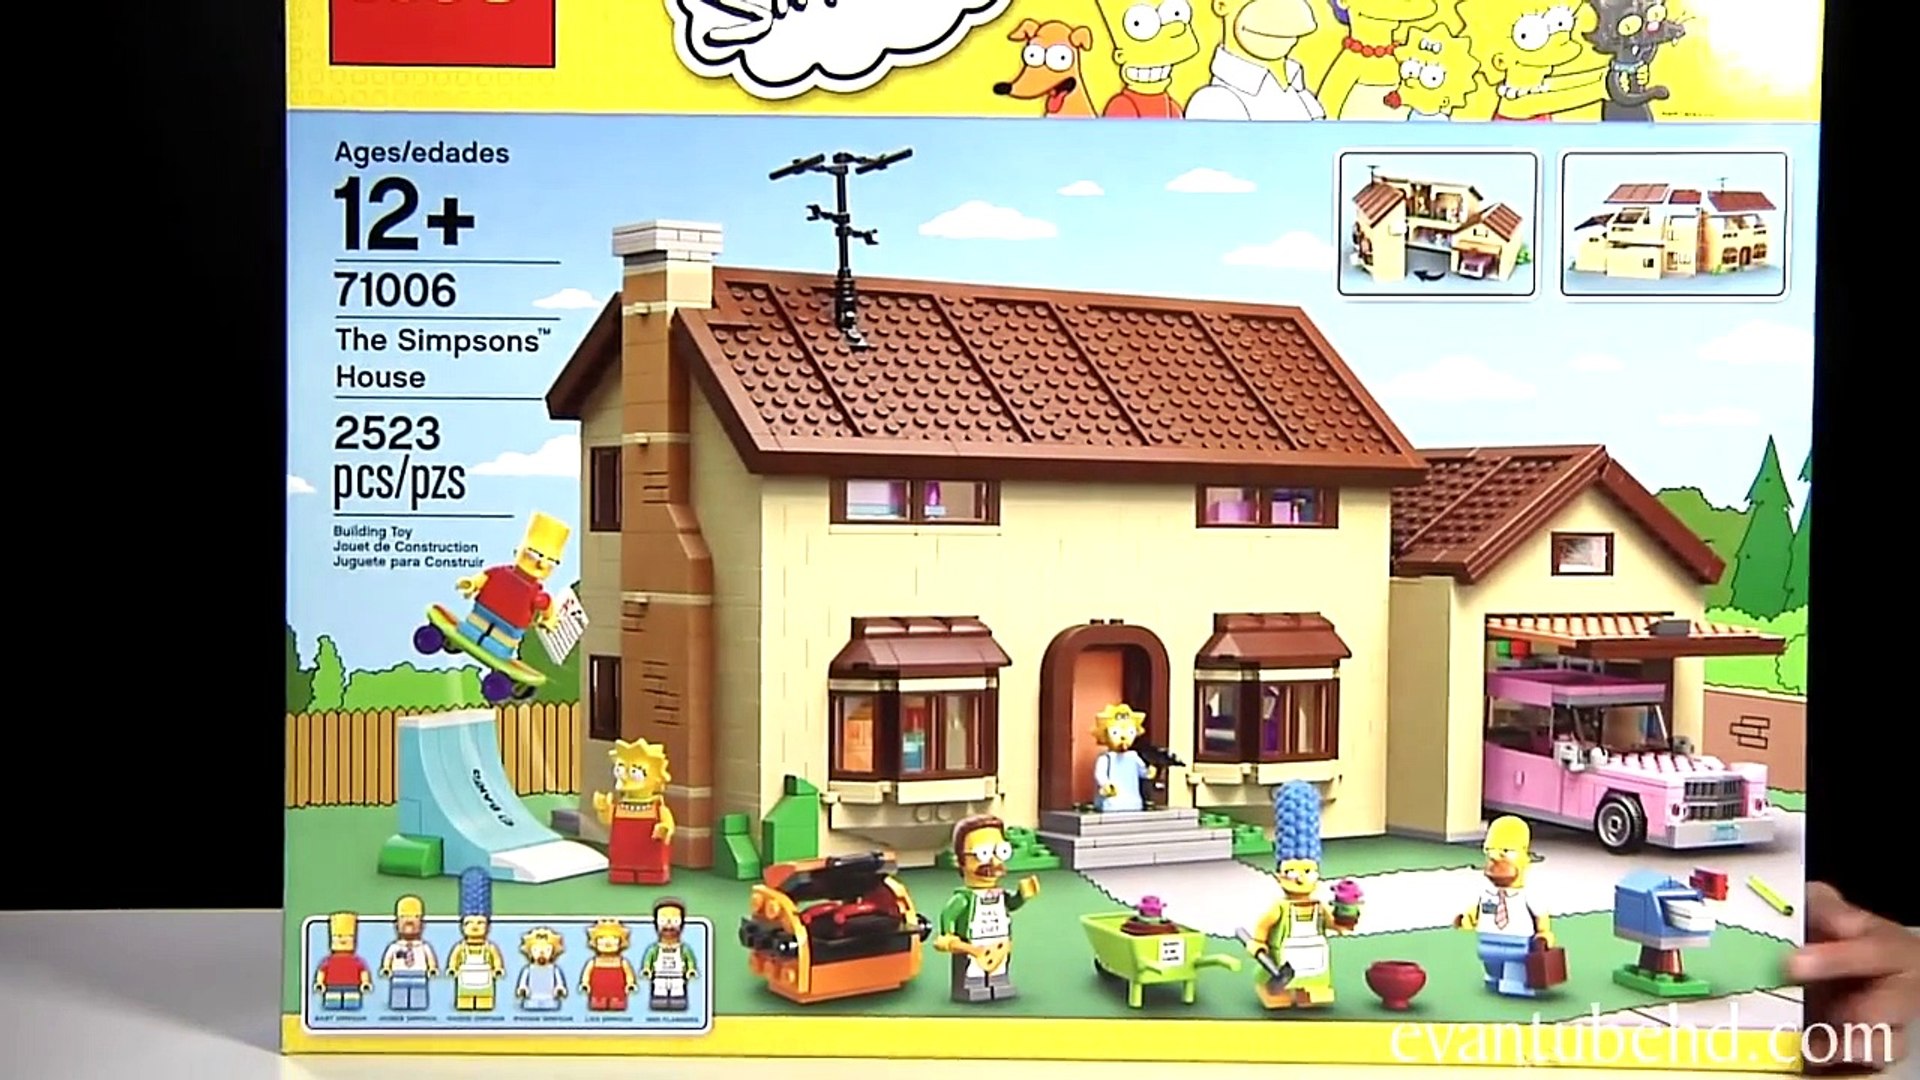 The SIMPSONS HOUSE LEGO Simpsons Set 71006 Time lapse Build, Unboxing &  Review! - Dailymotion Video